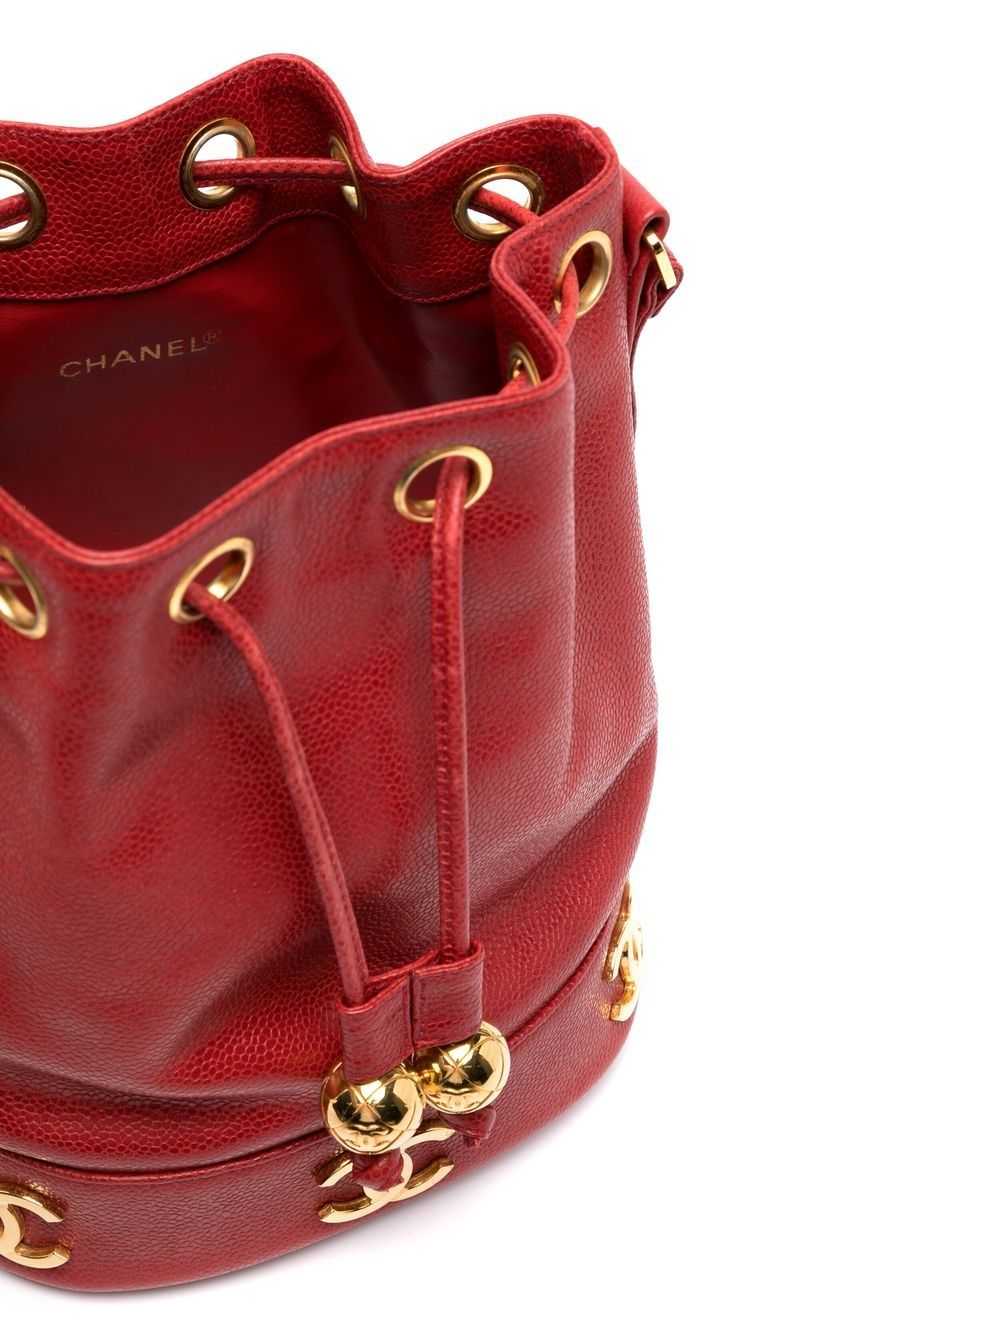 CHANEL Pre-Owned 1992 Triple CC bag - Red - image 5